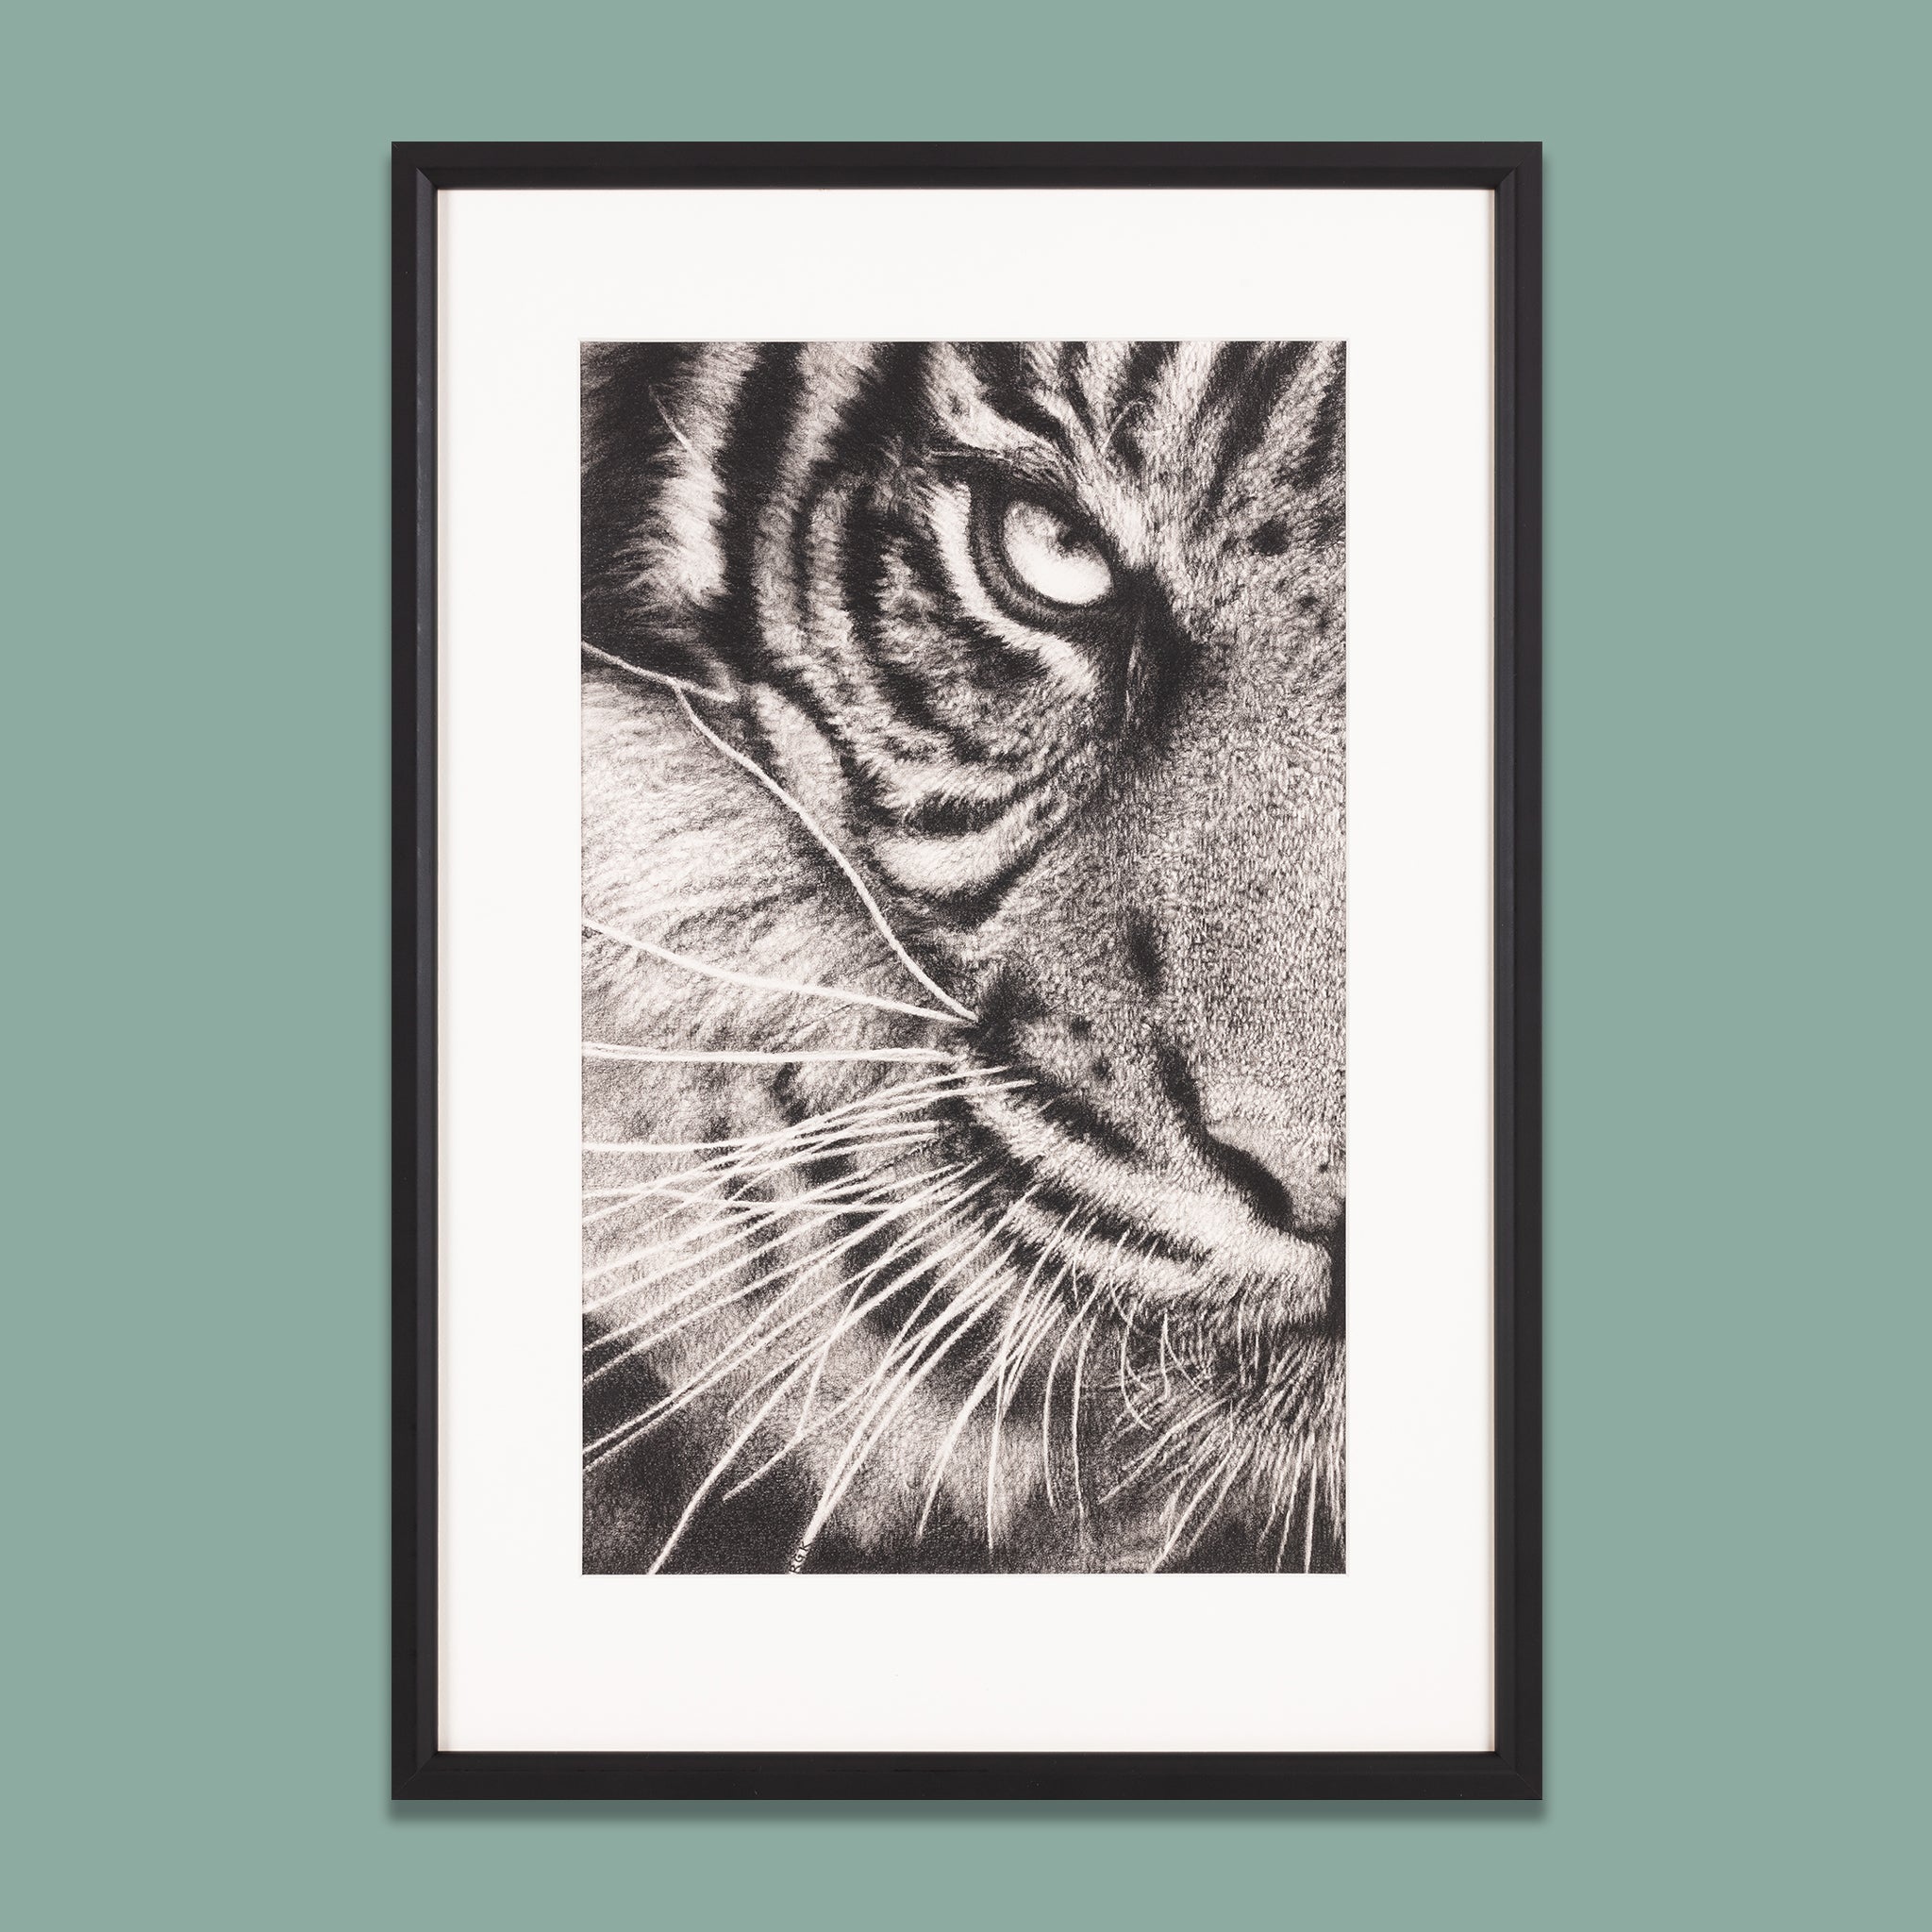 Angry tiger stock illustration. Illustration of sketch - 91575461